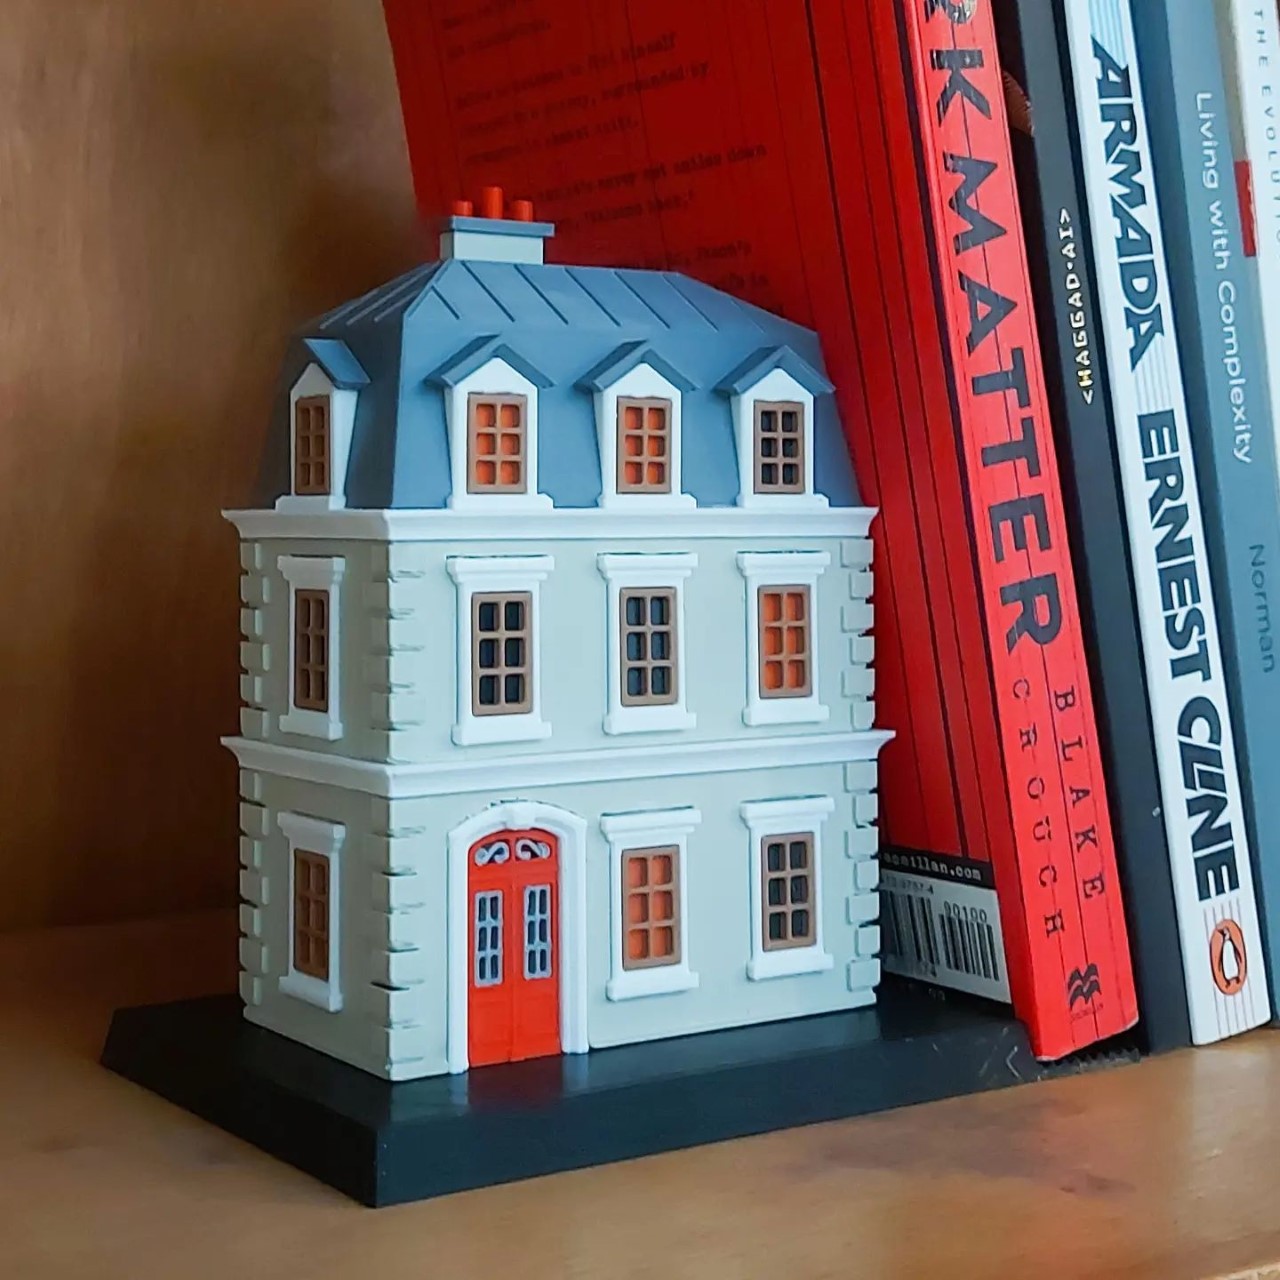 Art Meets Functionality: This 3D Printed Parisian Building Bookend is Perfect for the Literary Traveler